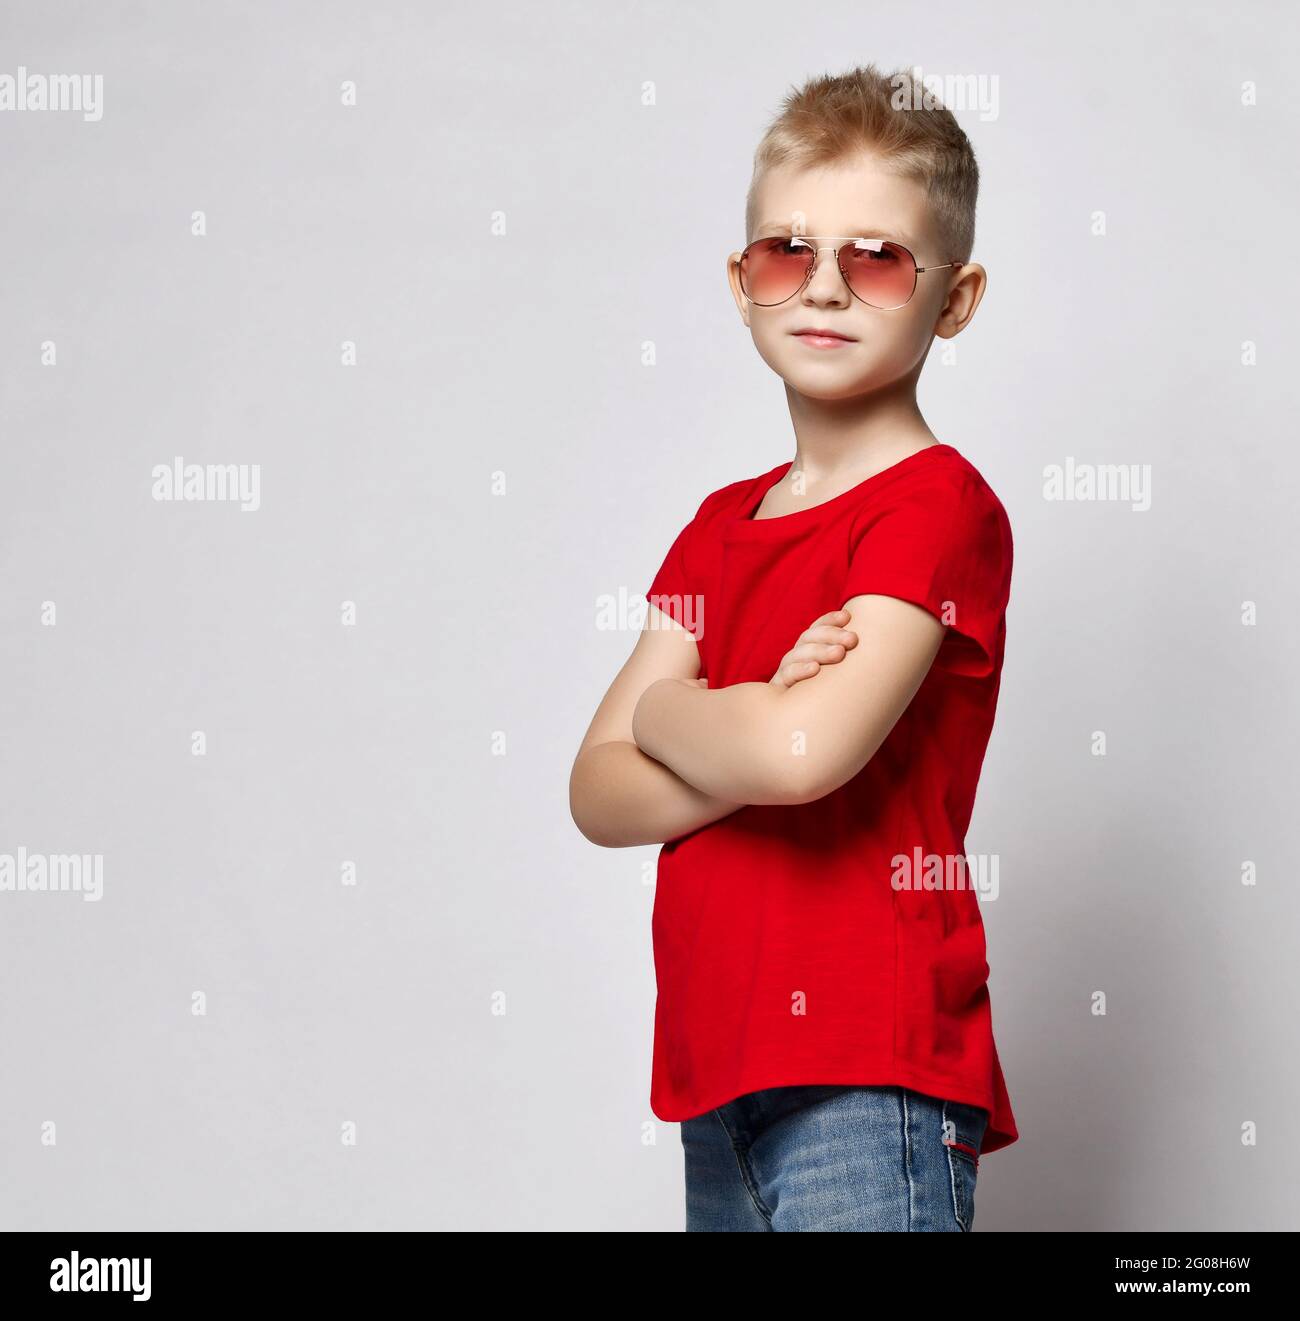 Stylish kid boy child in red t-shirt, jeans and sunglasses standing with hands crossed looking at camera Stock Photo